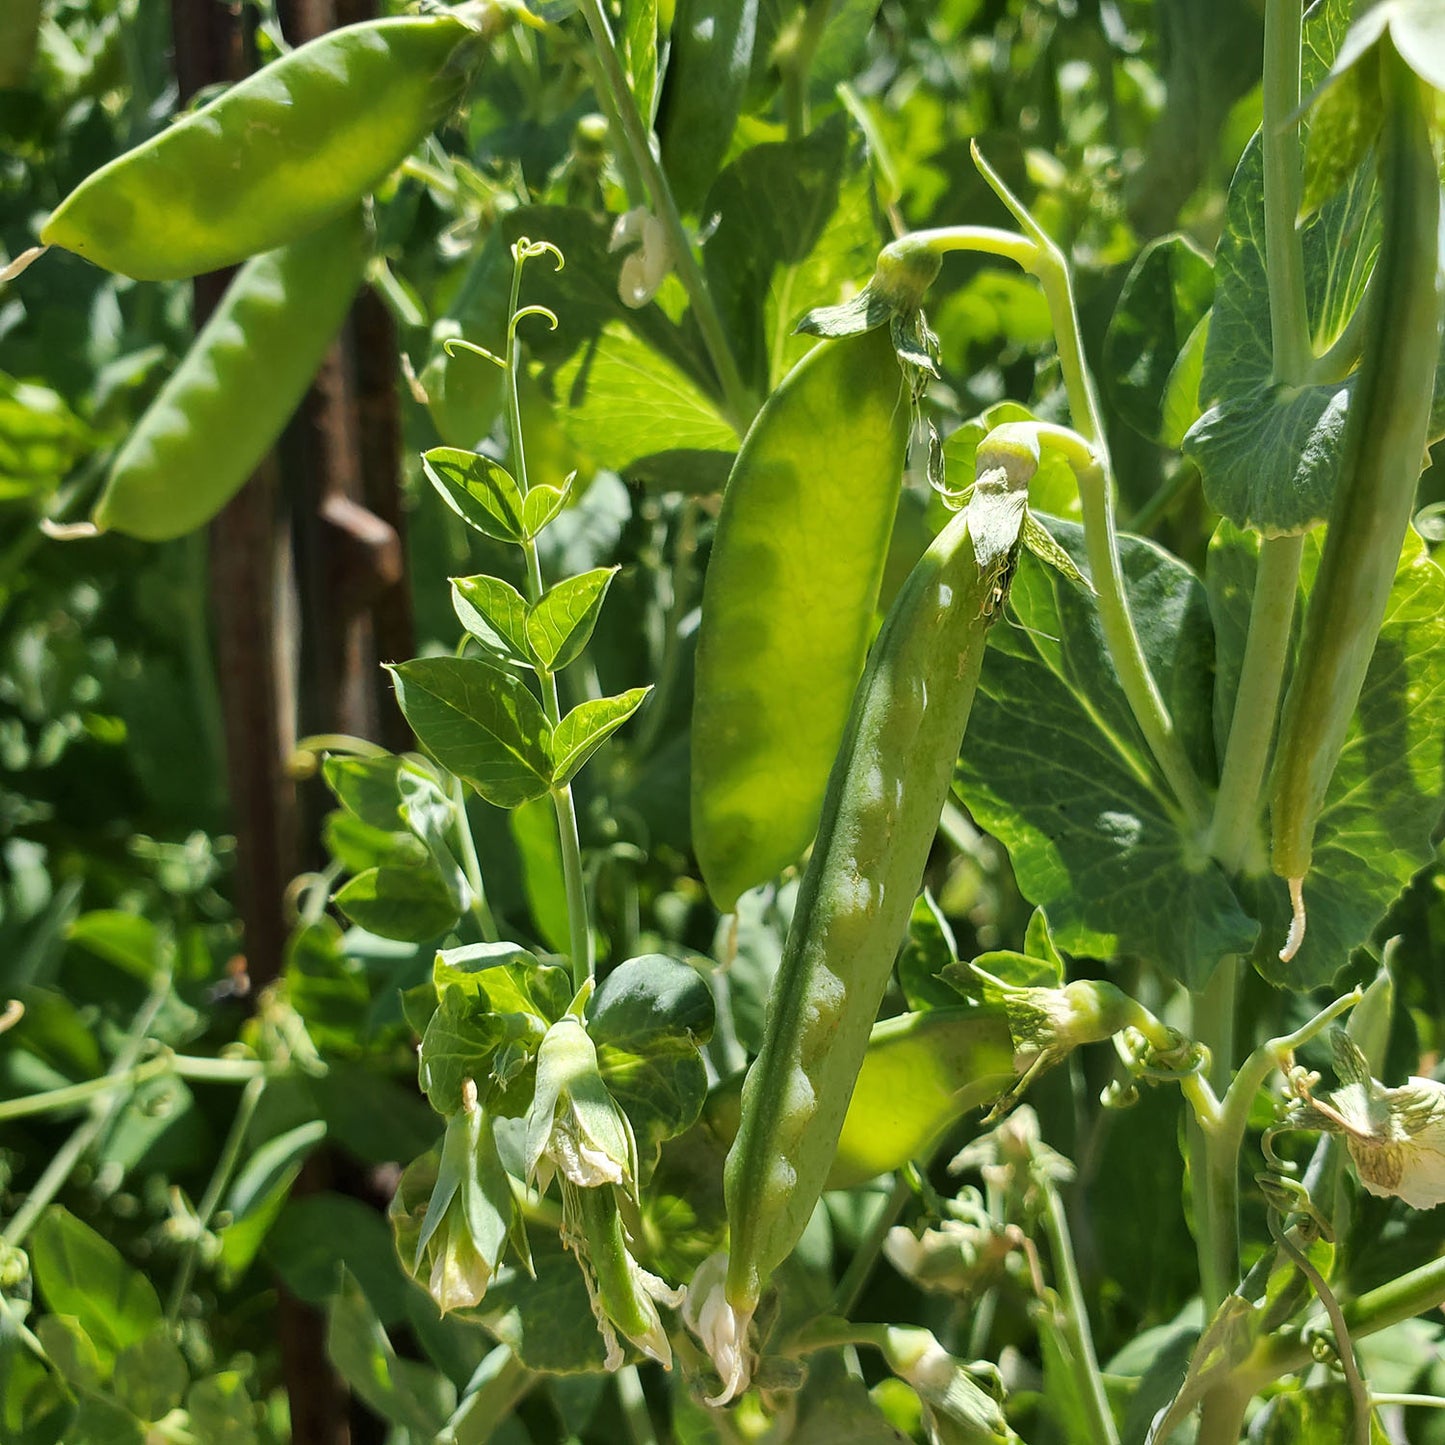 young pea pods growing on pea plants, lit by sunshine